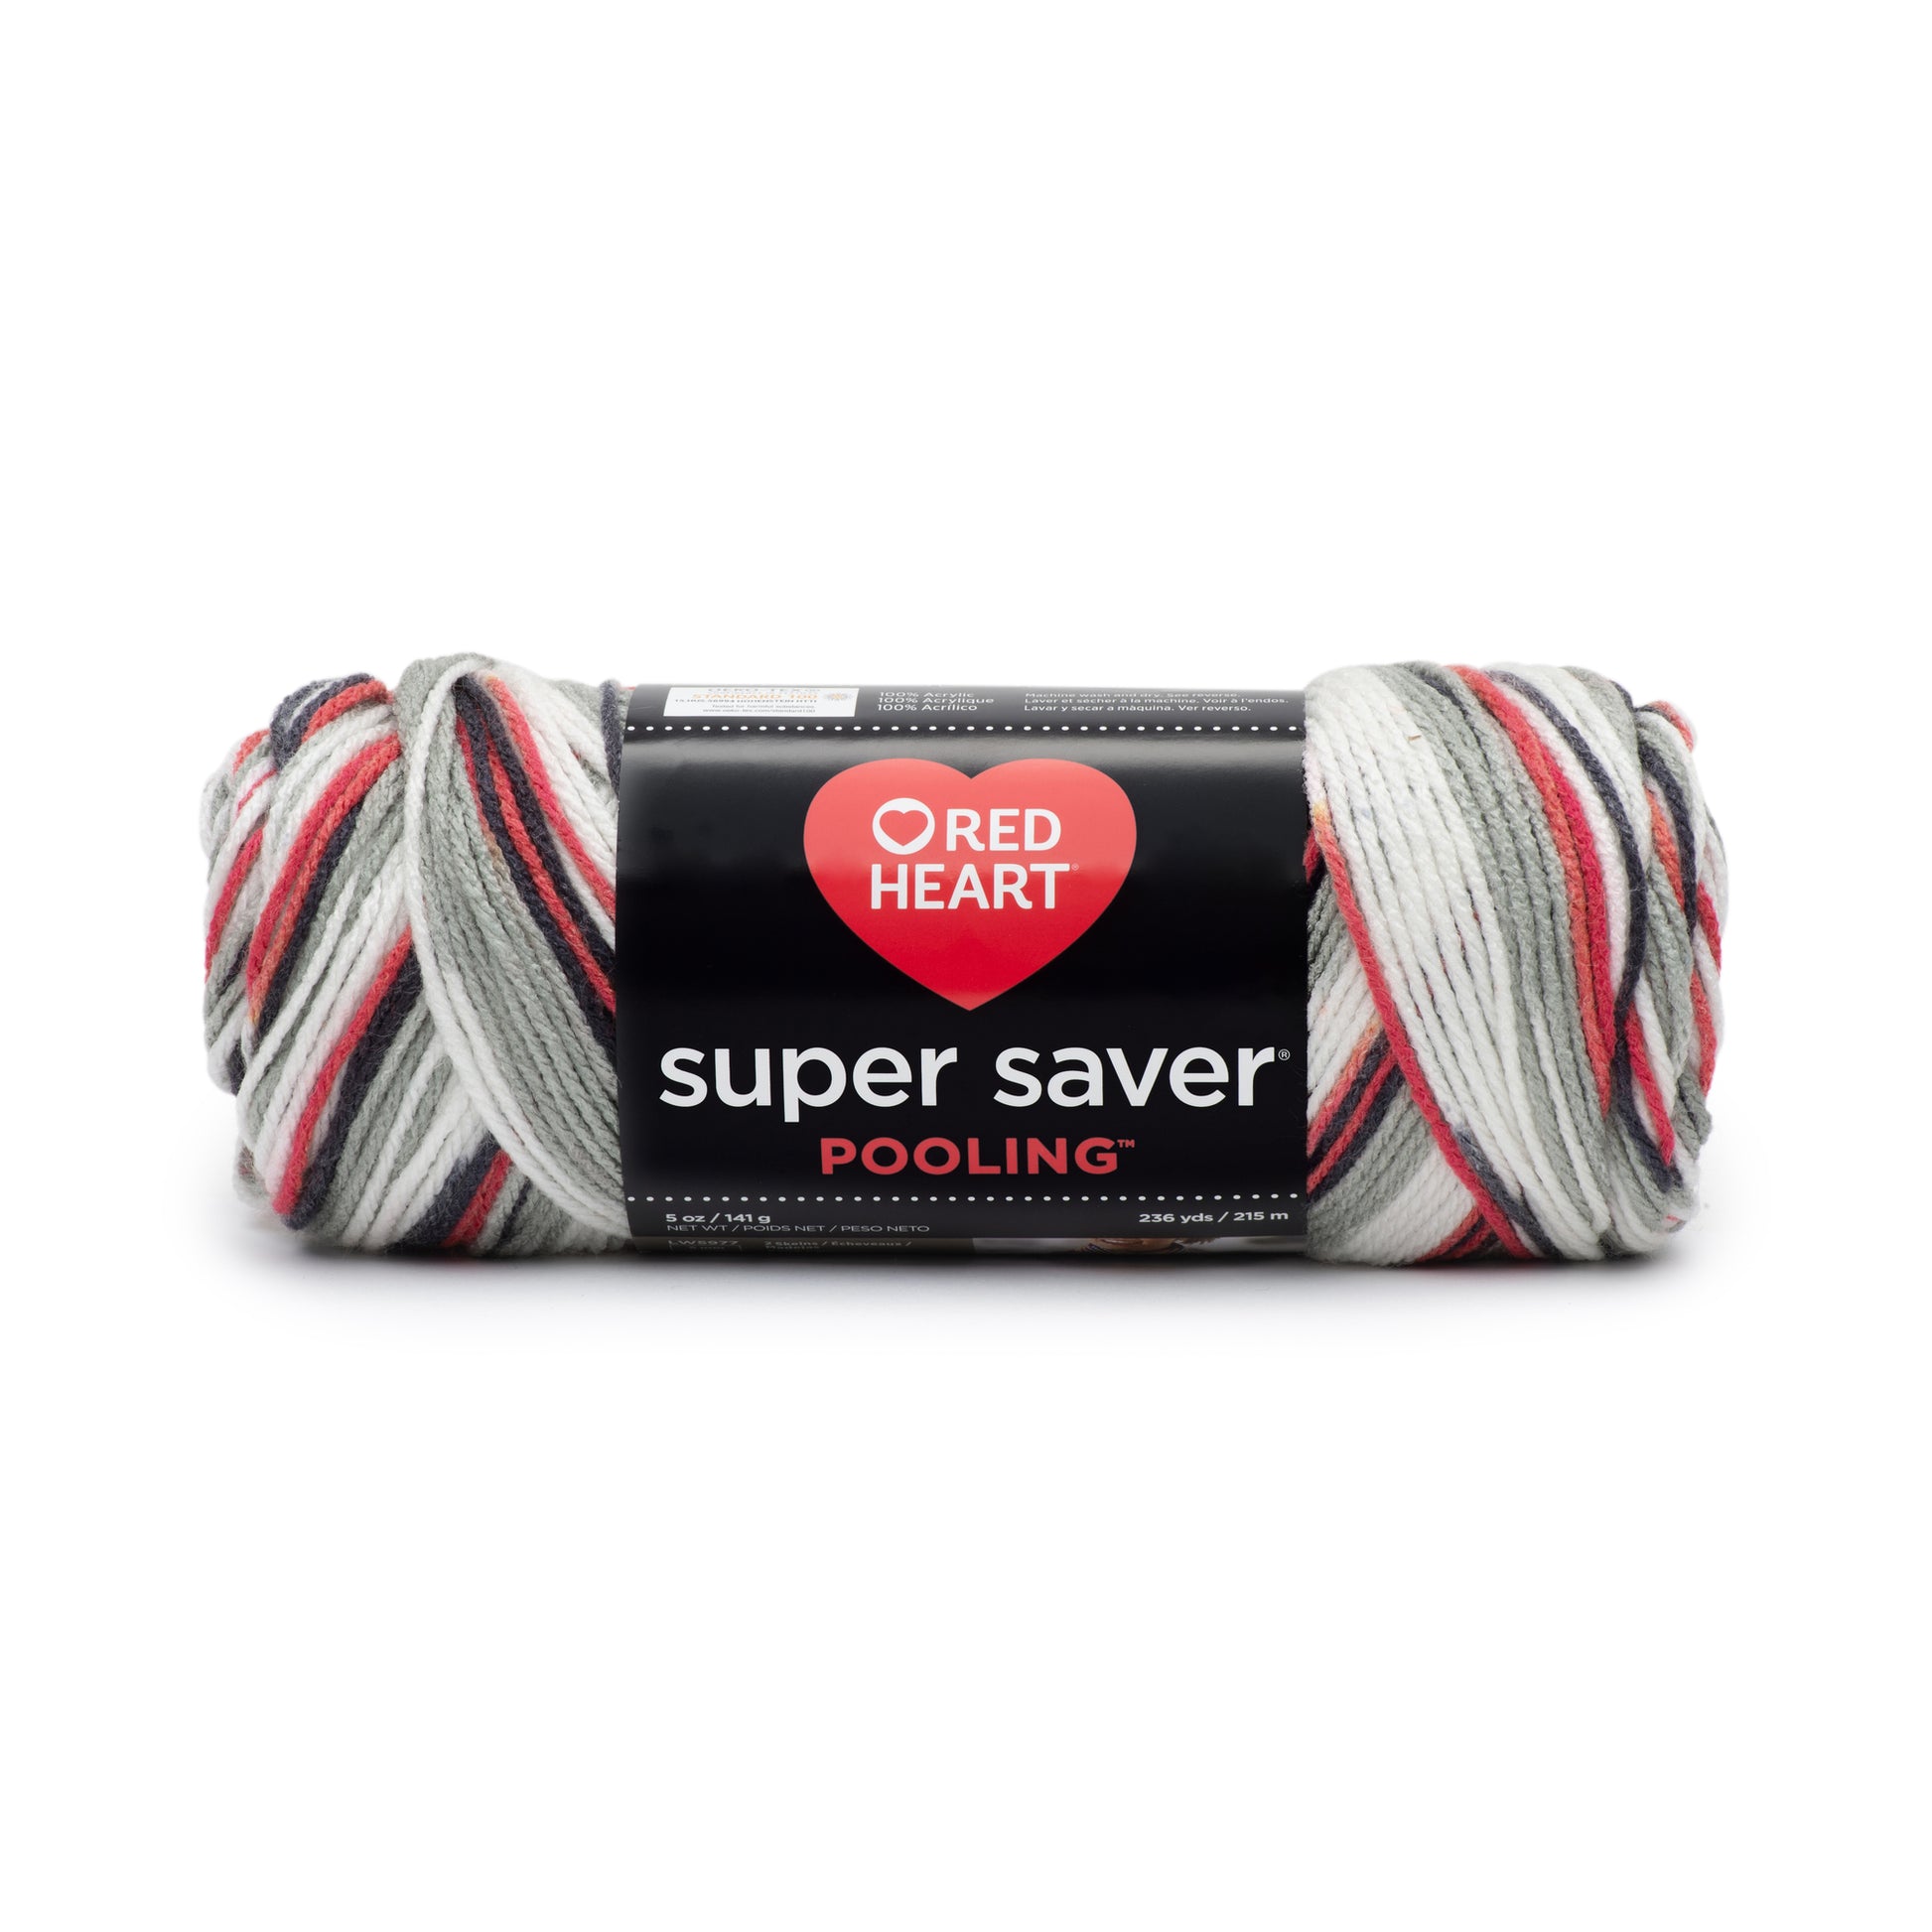 Red Heart Super Saver Mulberry Mix Yarn - 3 Pack of 141g/5oz - Acrylic - 4  Medium (Worsted) - 364 Yards - Knitting/Crochet